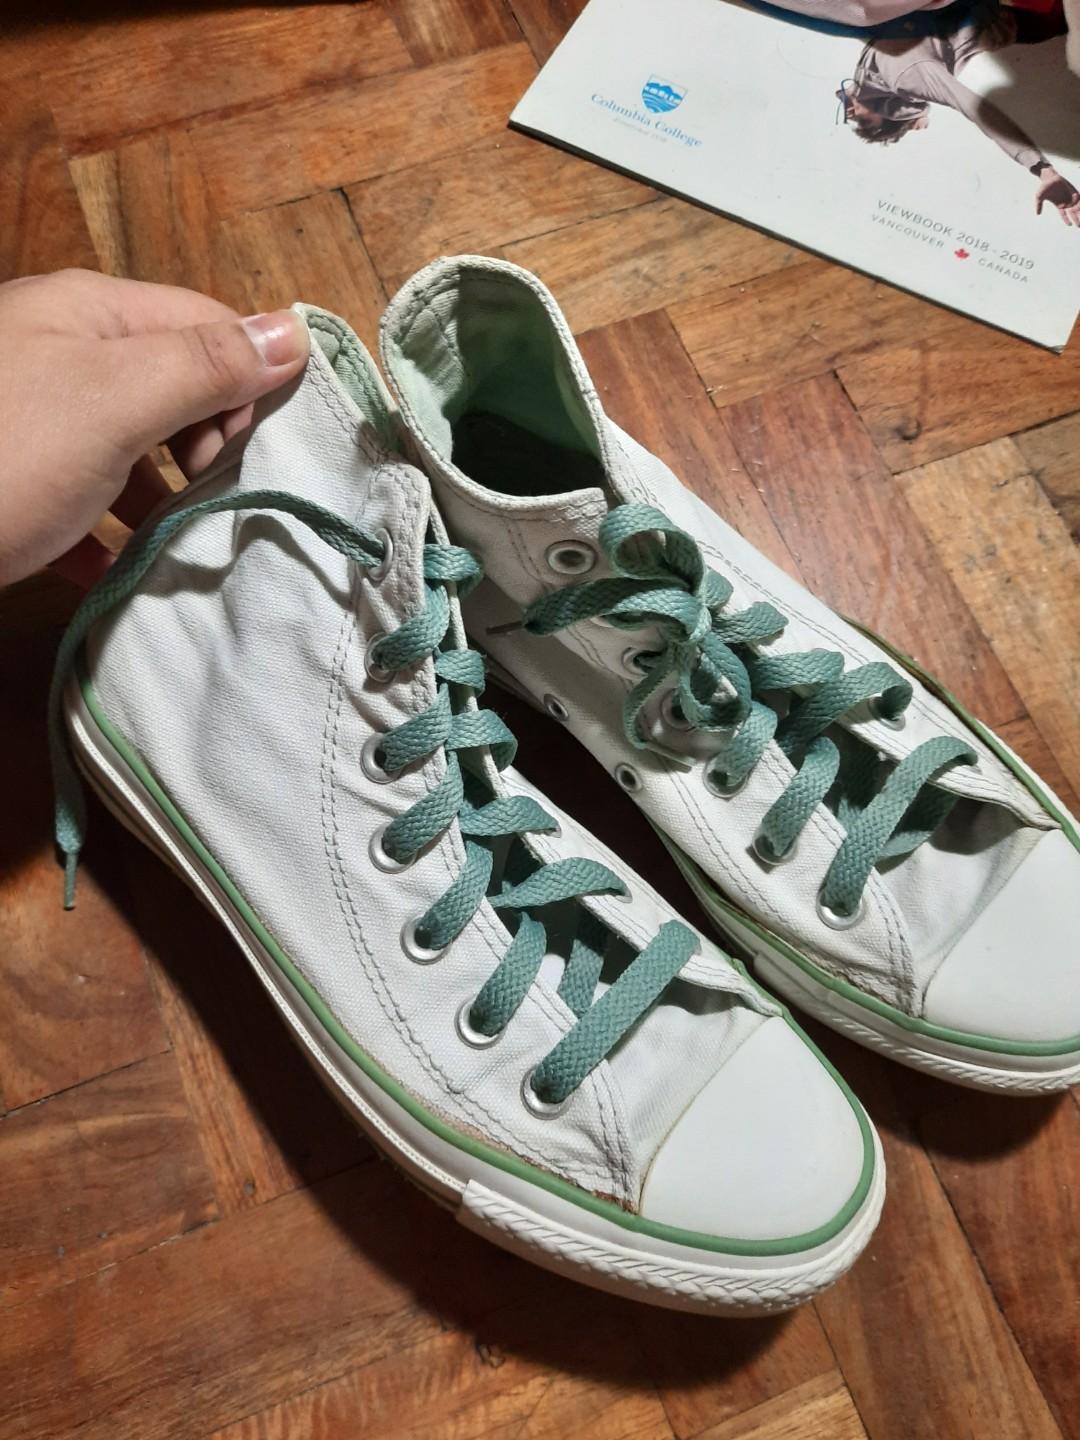 converse limited edition 2018 5x